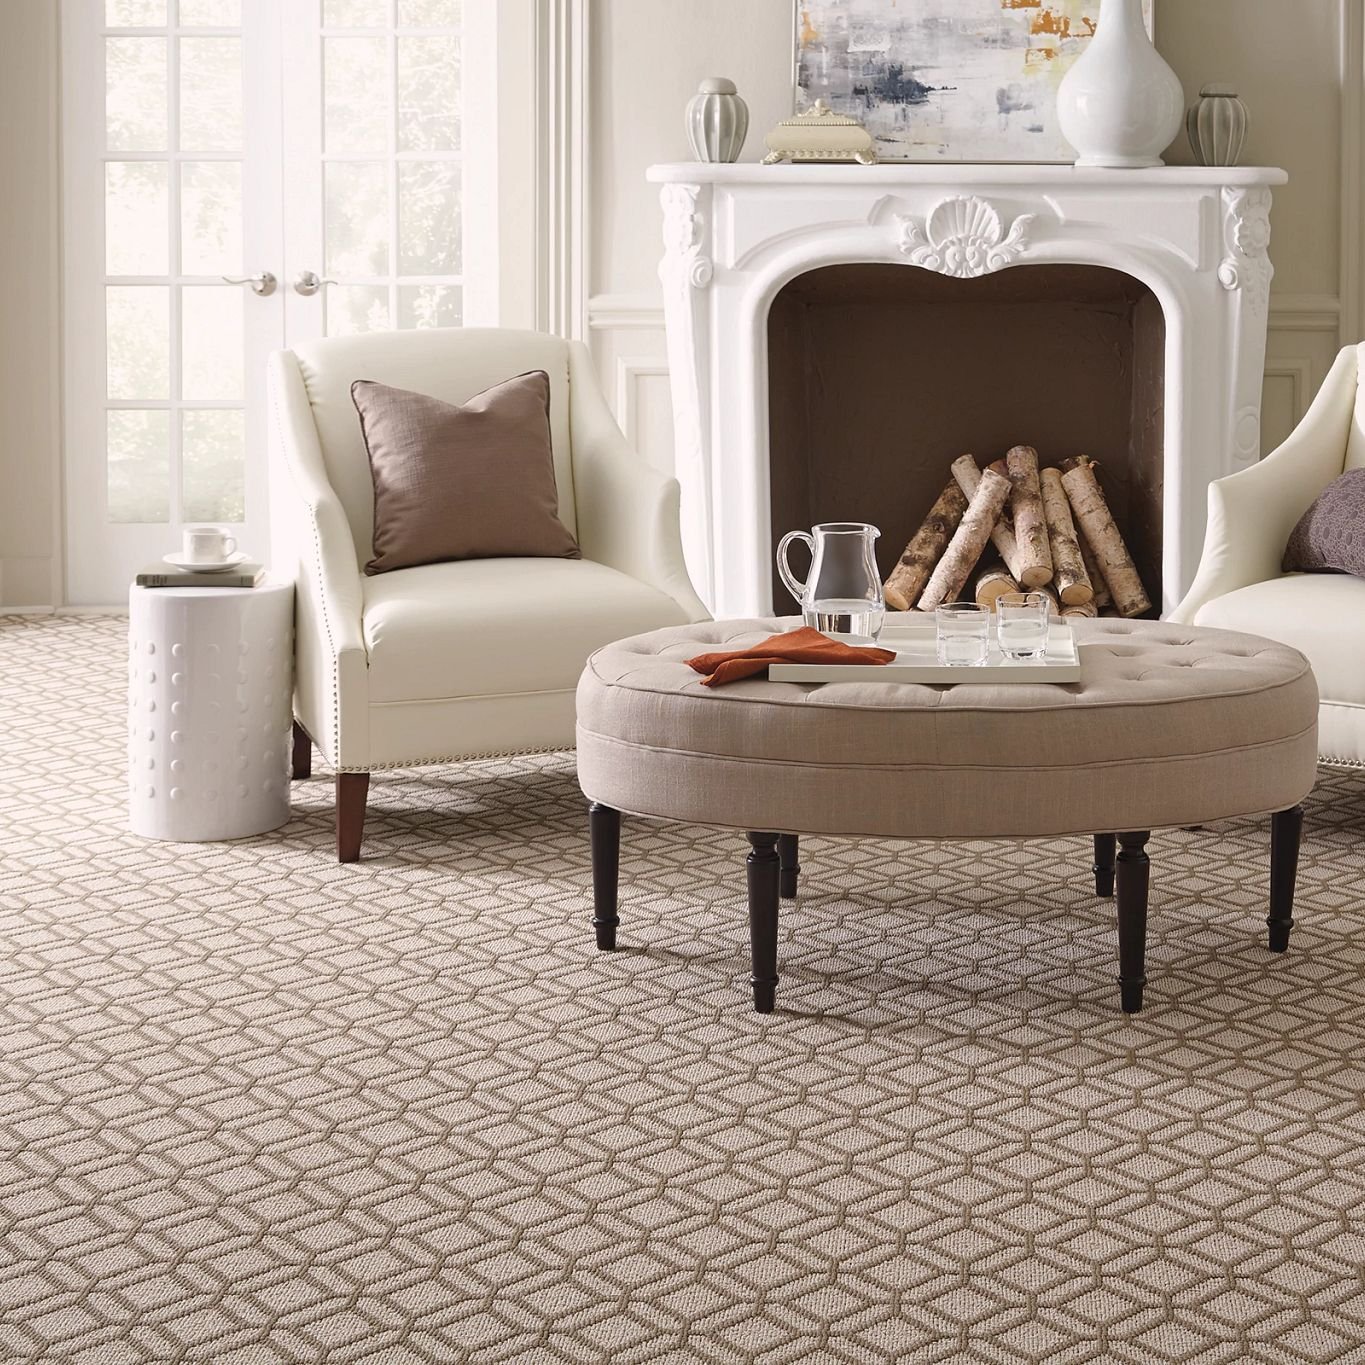 Anderson Tuftex Collection Preview from Gerami's Floors in Lafayette